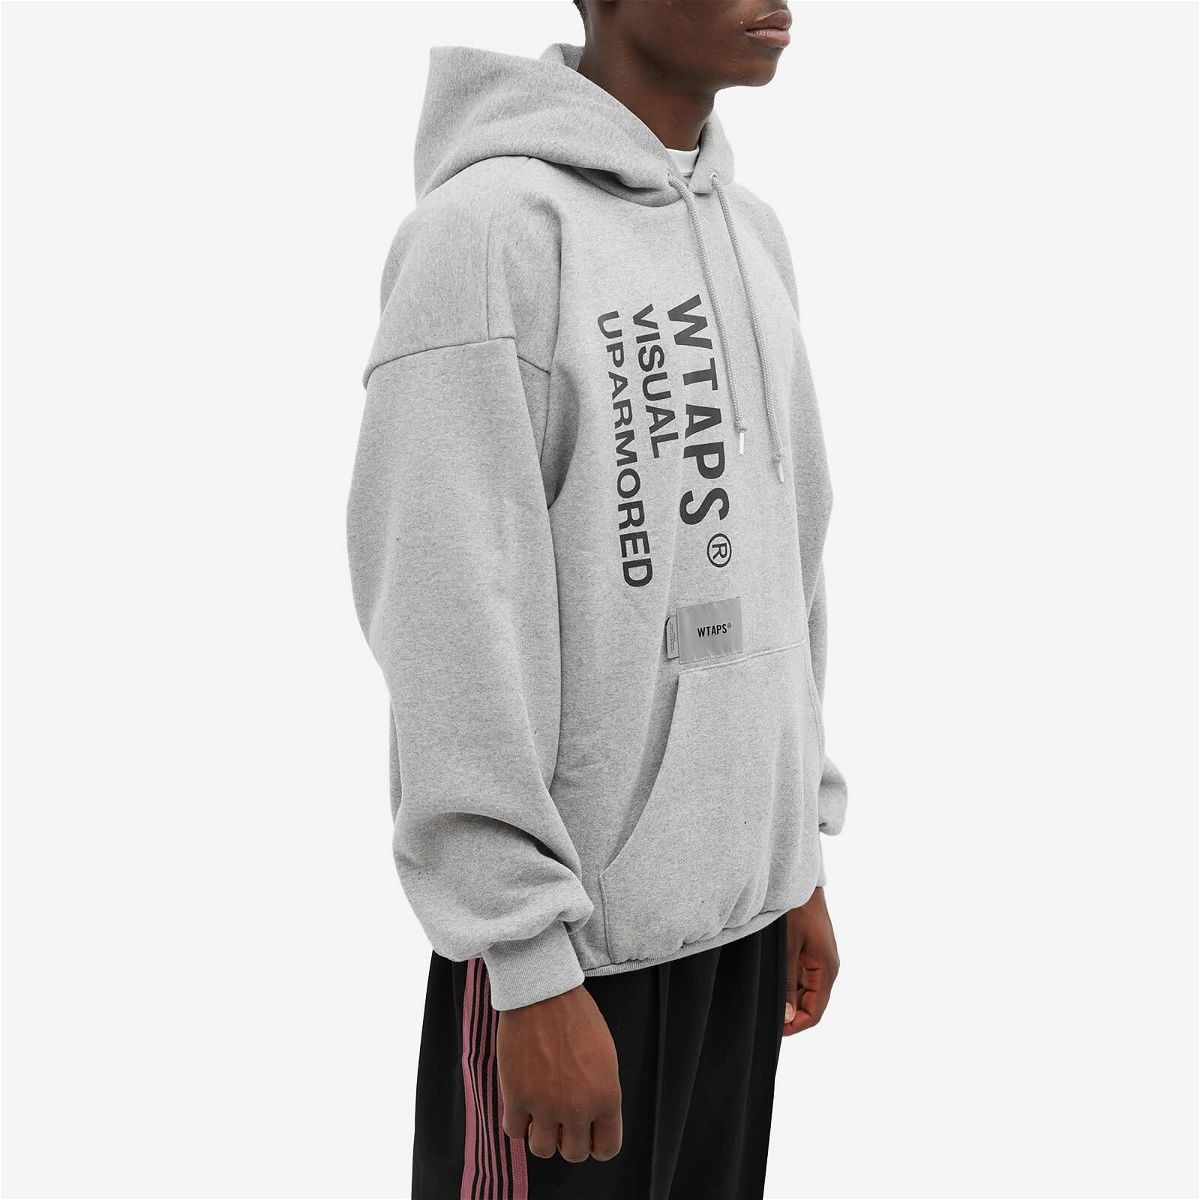 WTAPS Men's Visual Uparmored Hoody in Grey WTAPS